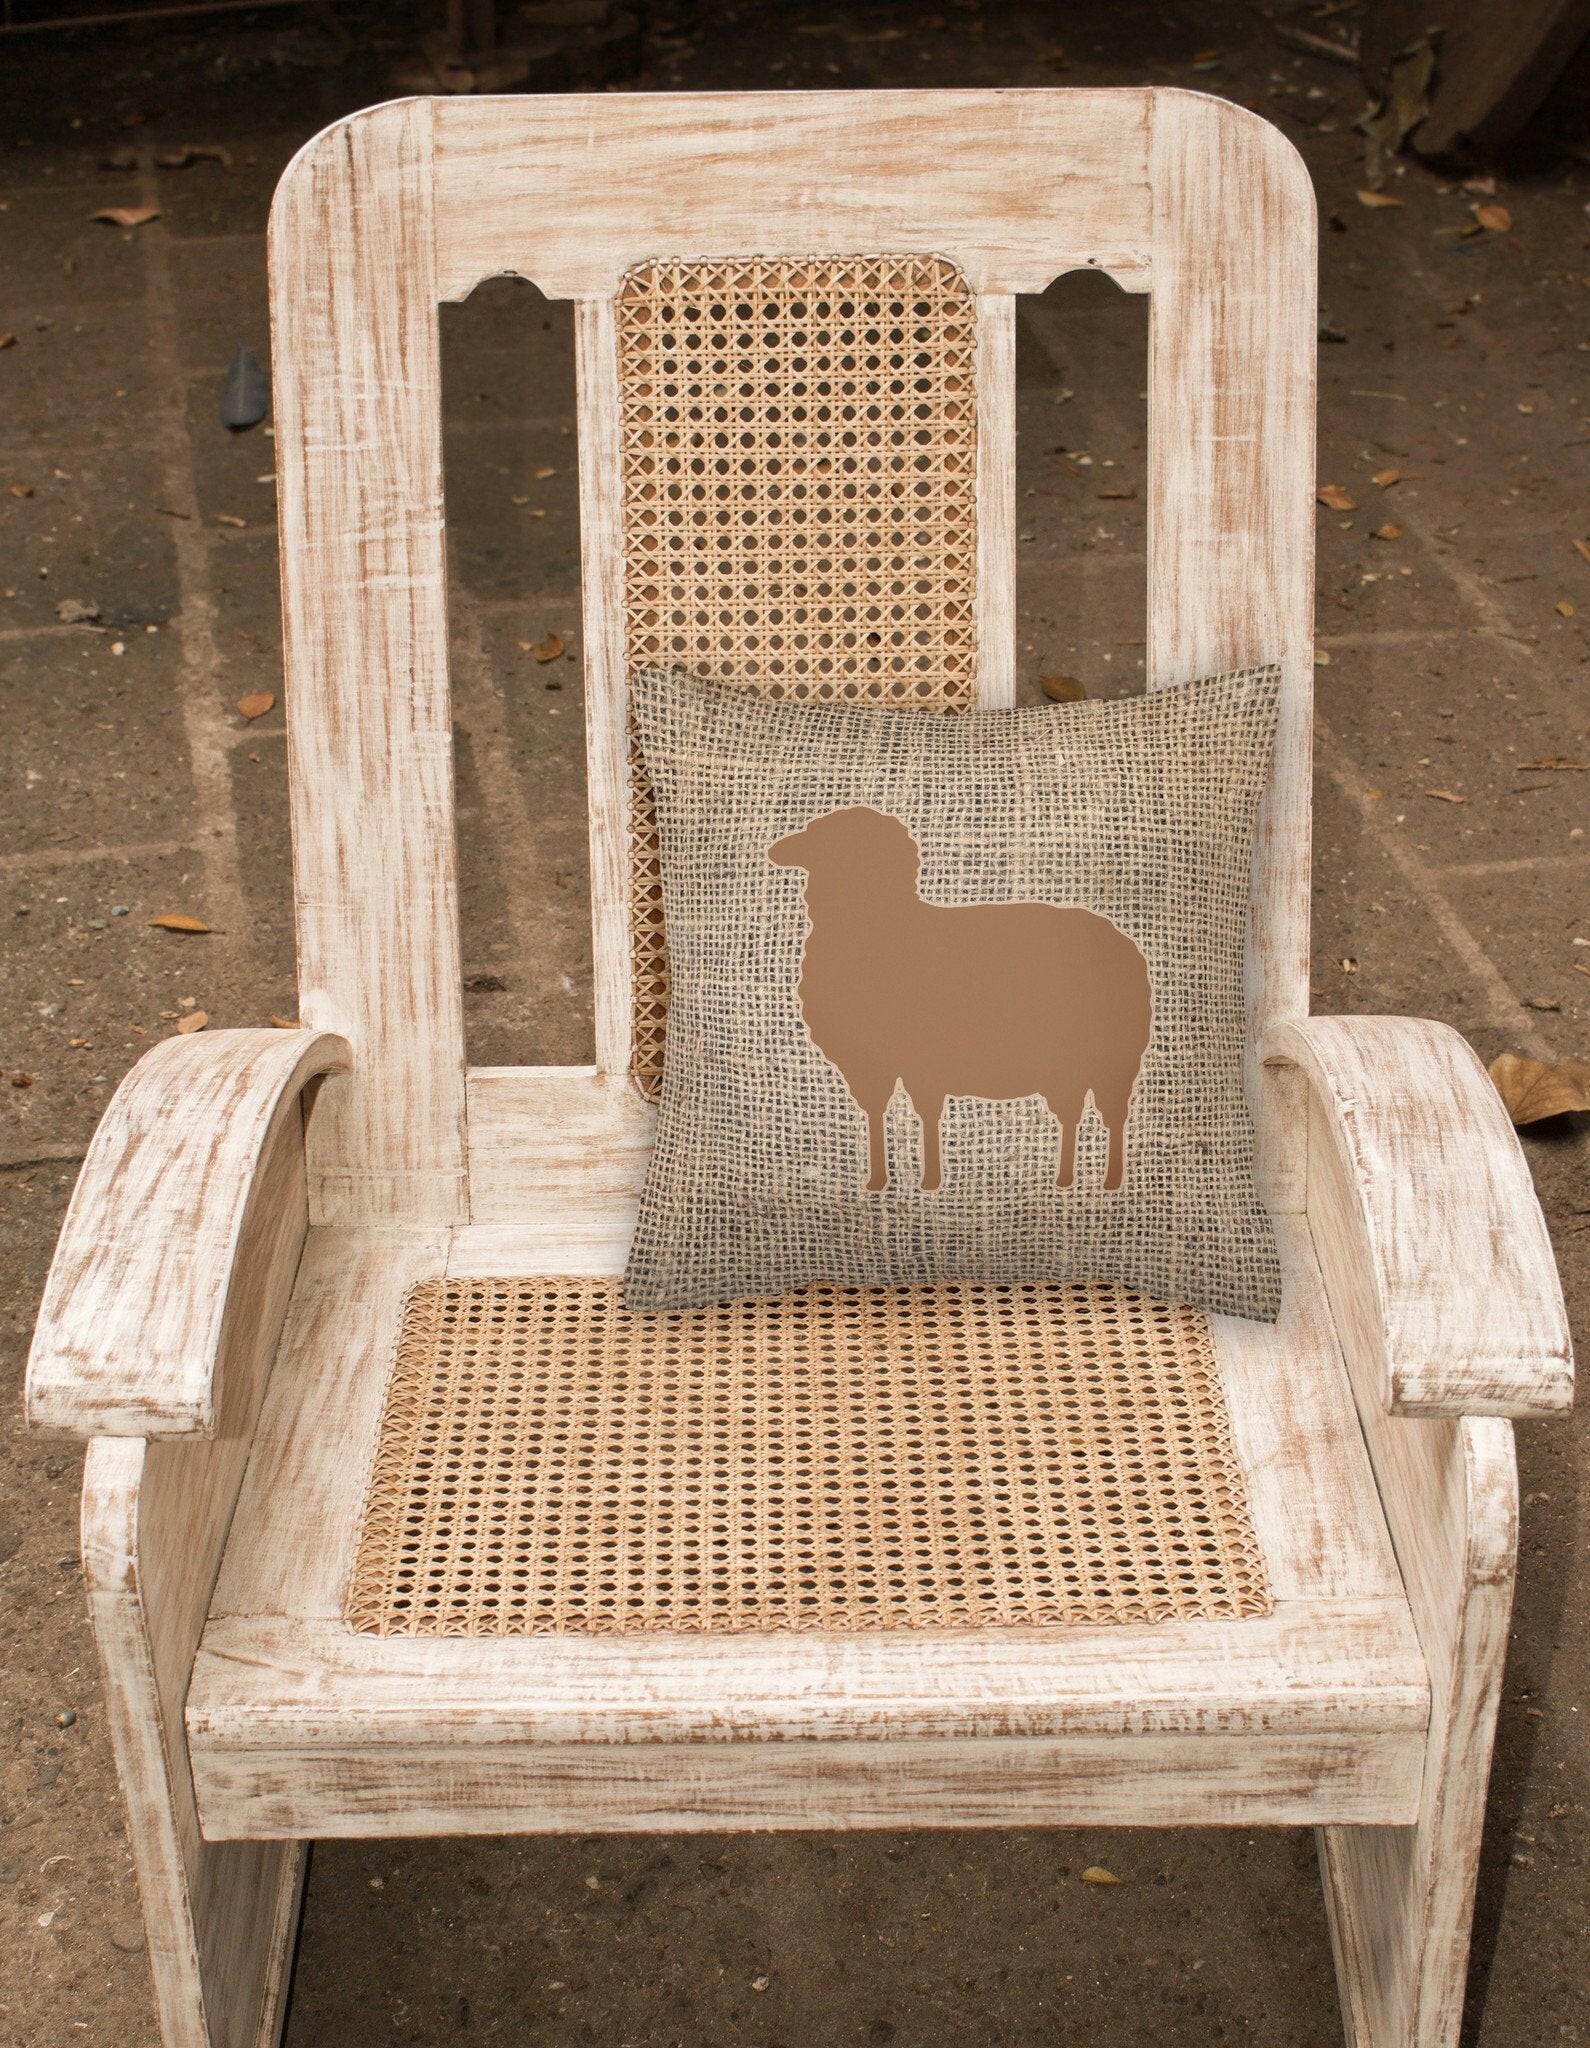 Sheep Burlap and Brown   Canvas Fabric Decorative Pillow BB1126 - the-store.com